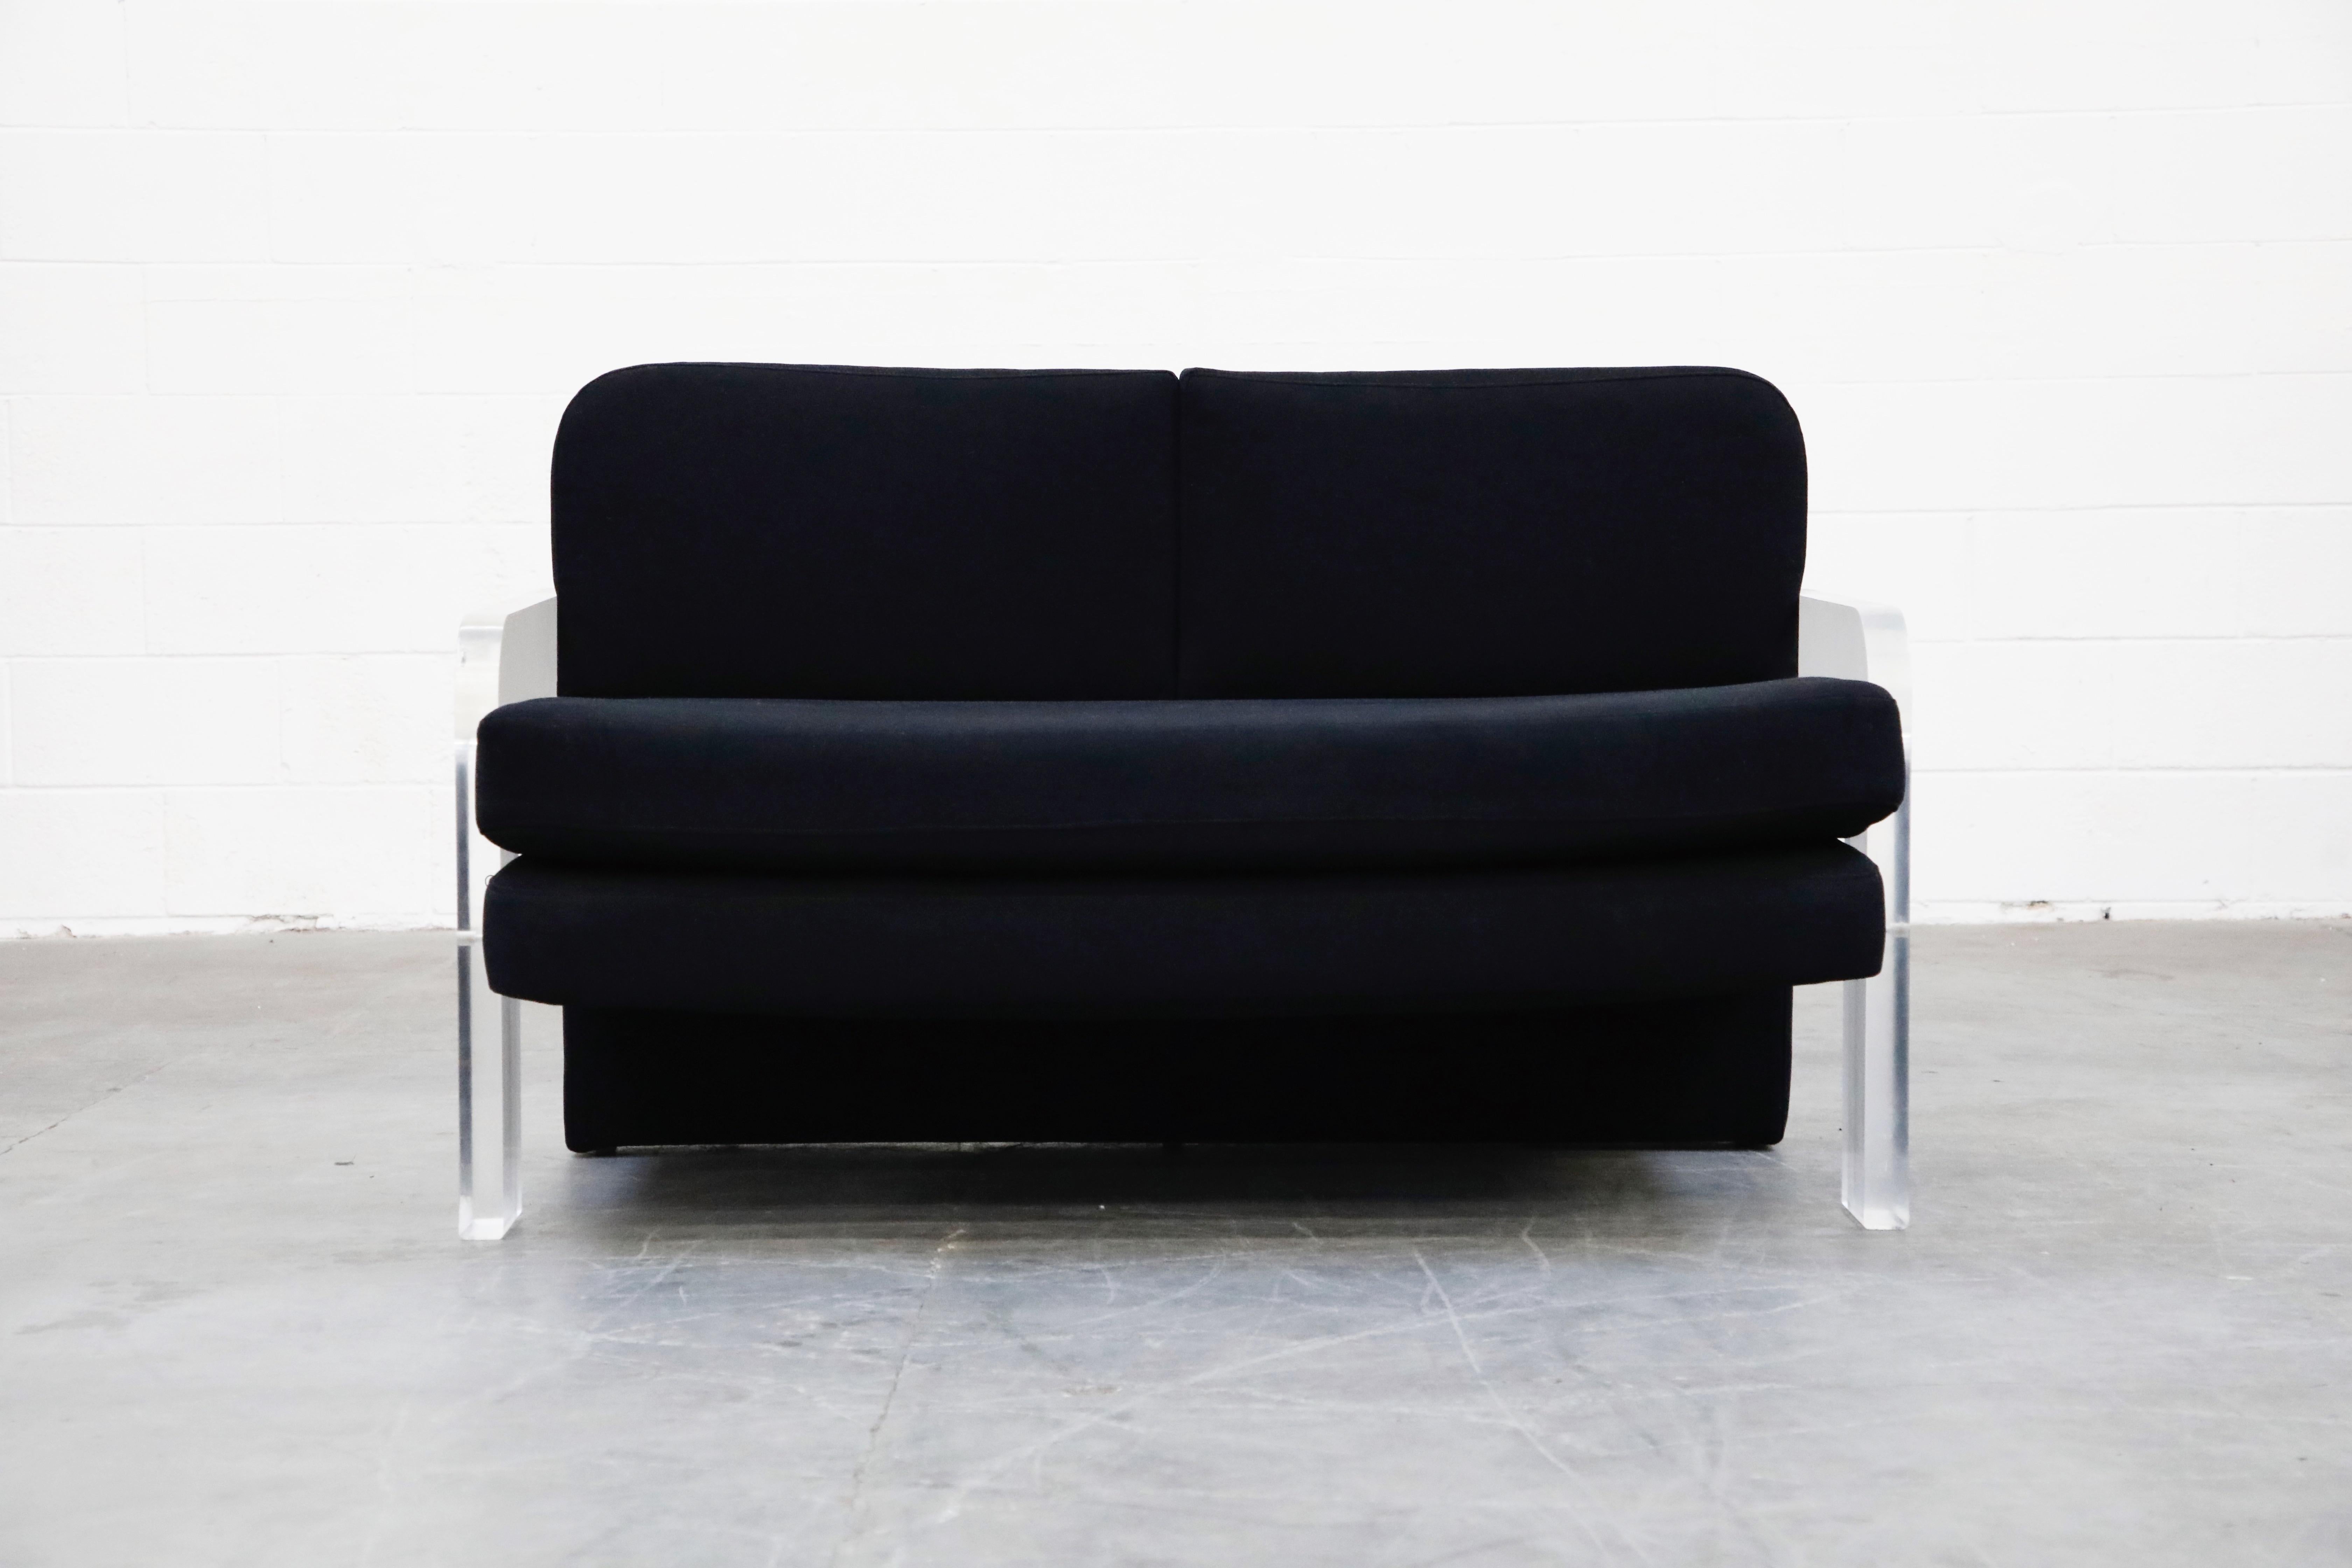 A stylish and Classic Vladimir Kagan settee with Lucite arms and legs and black fabric upholstery. This circa 1970s loveseat sofa is rare collectors piece, while also a comfortable and stylish addition to your interior design project. The